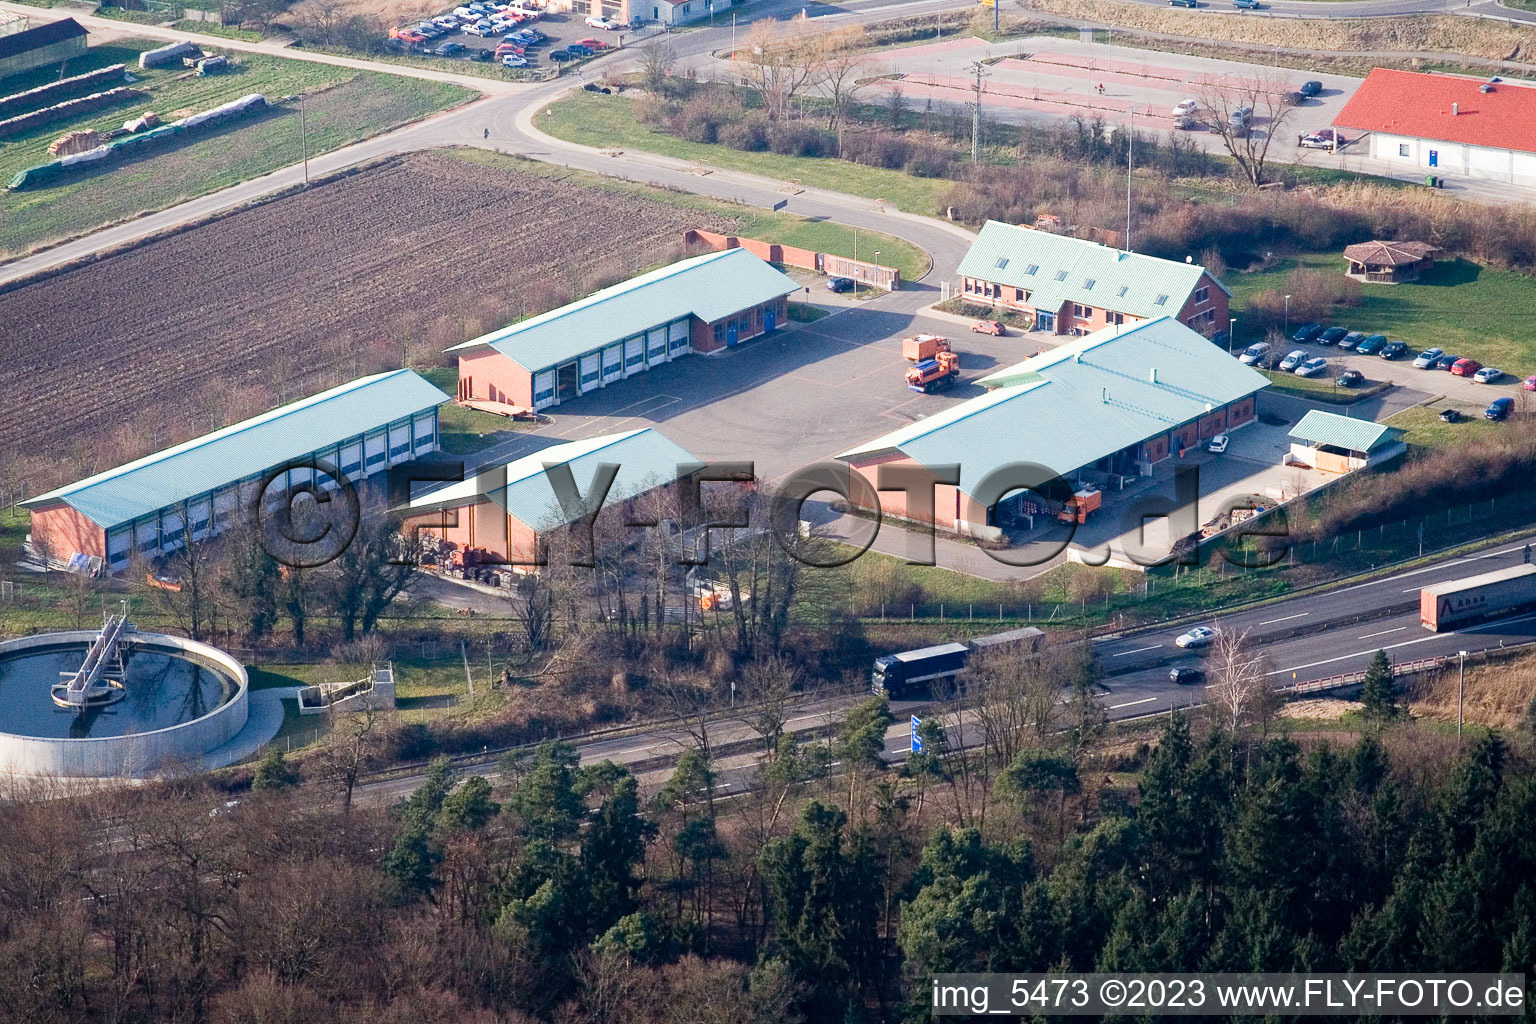 Oblique view of Highway maintenance department in Kandel in the state Rhineland-Palatinate, Germany